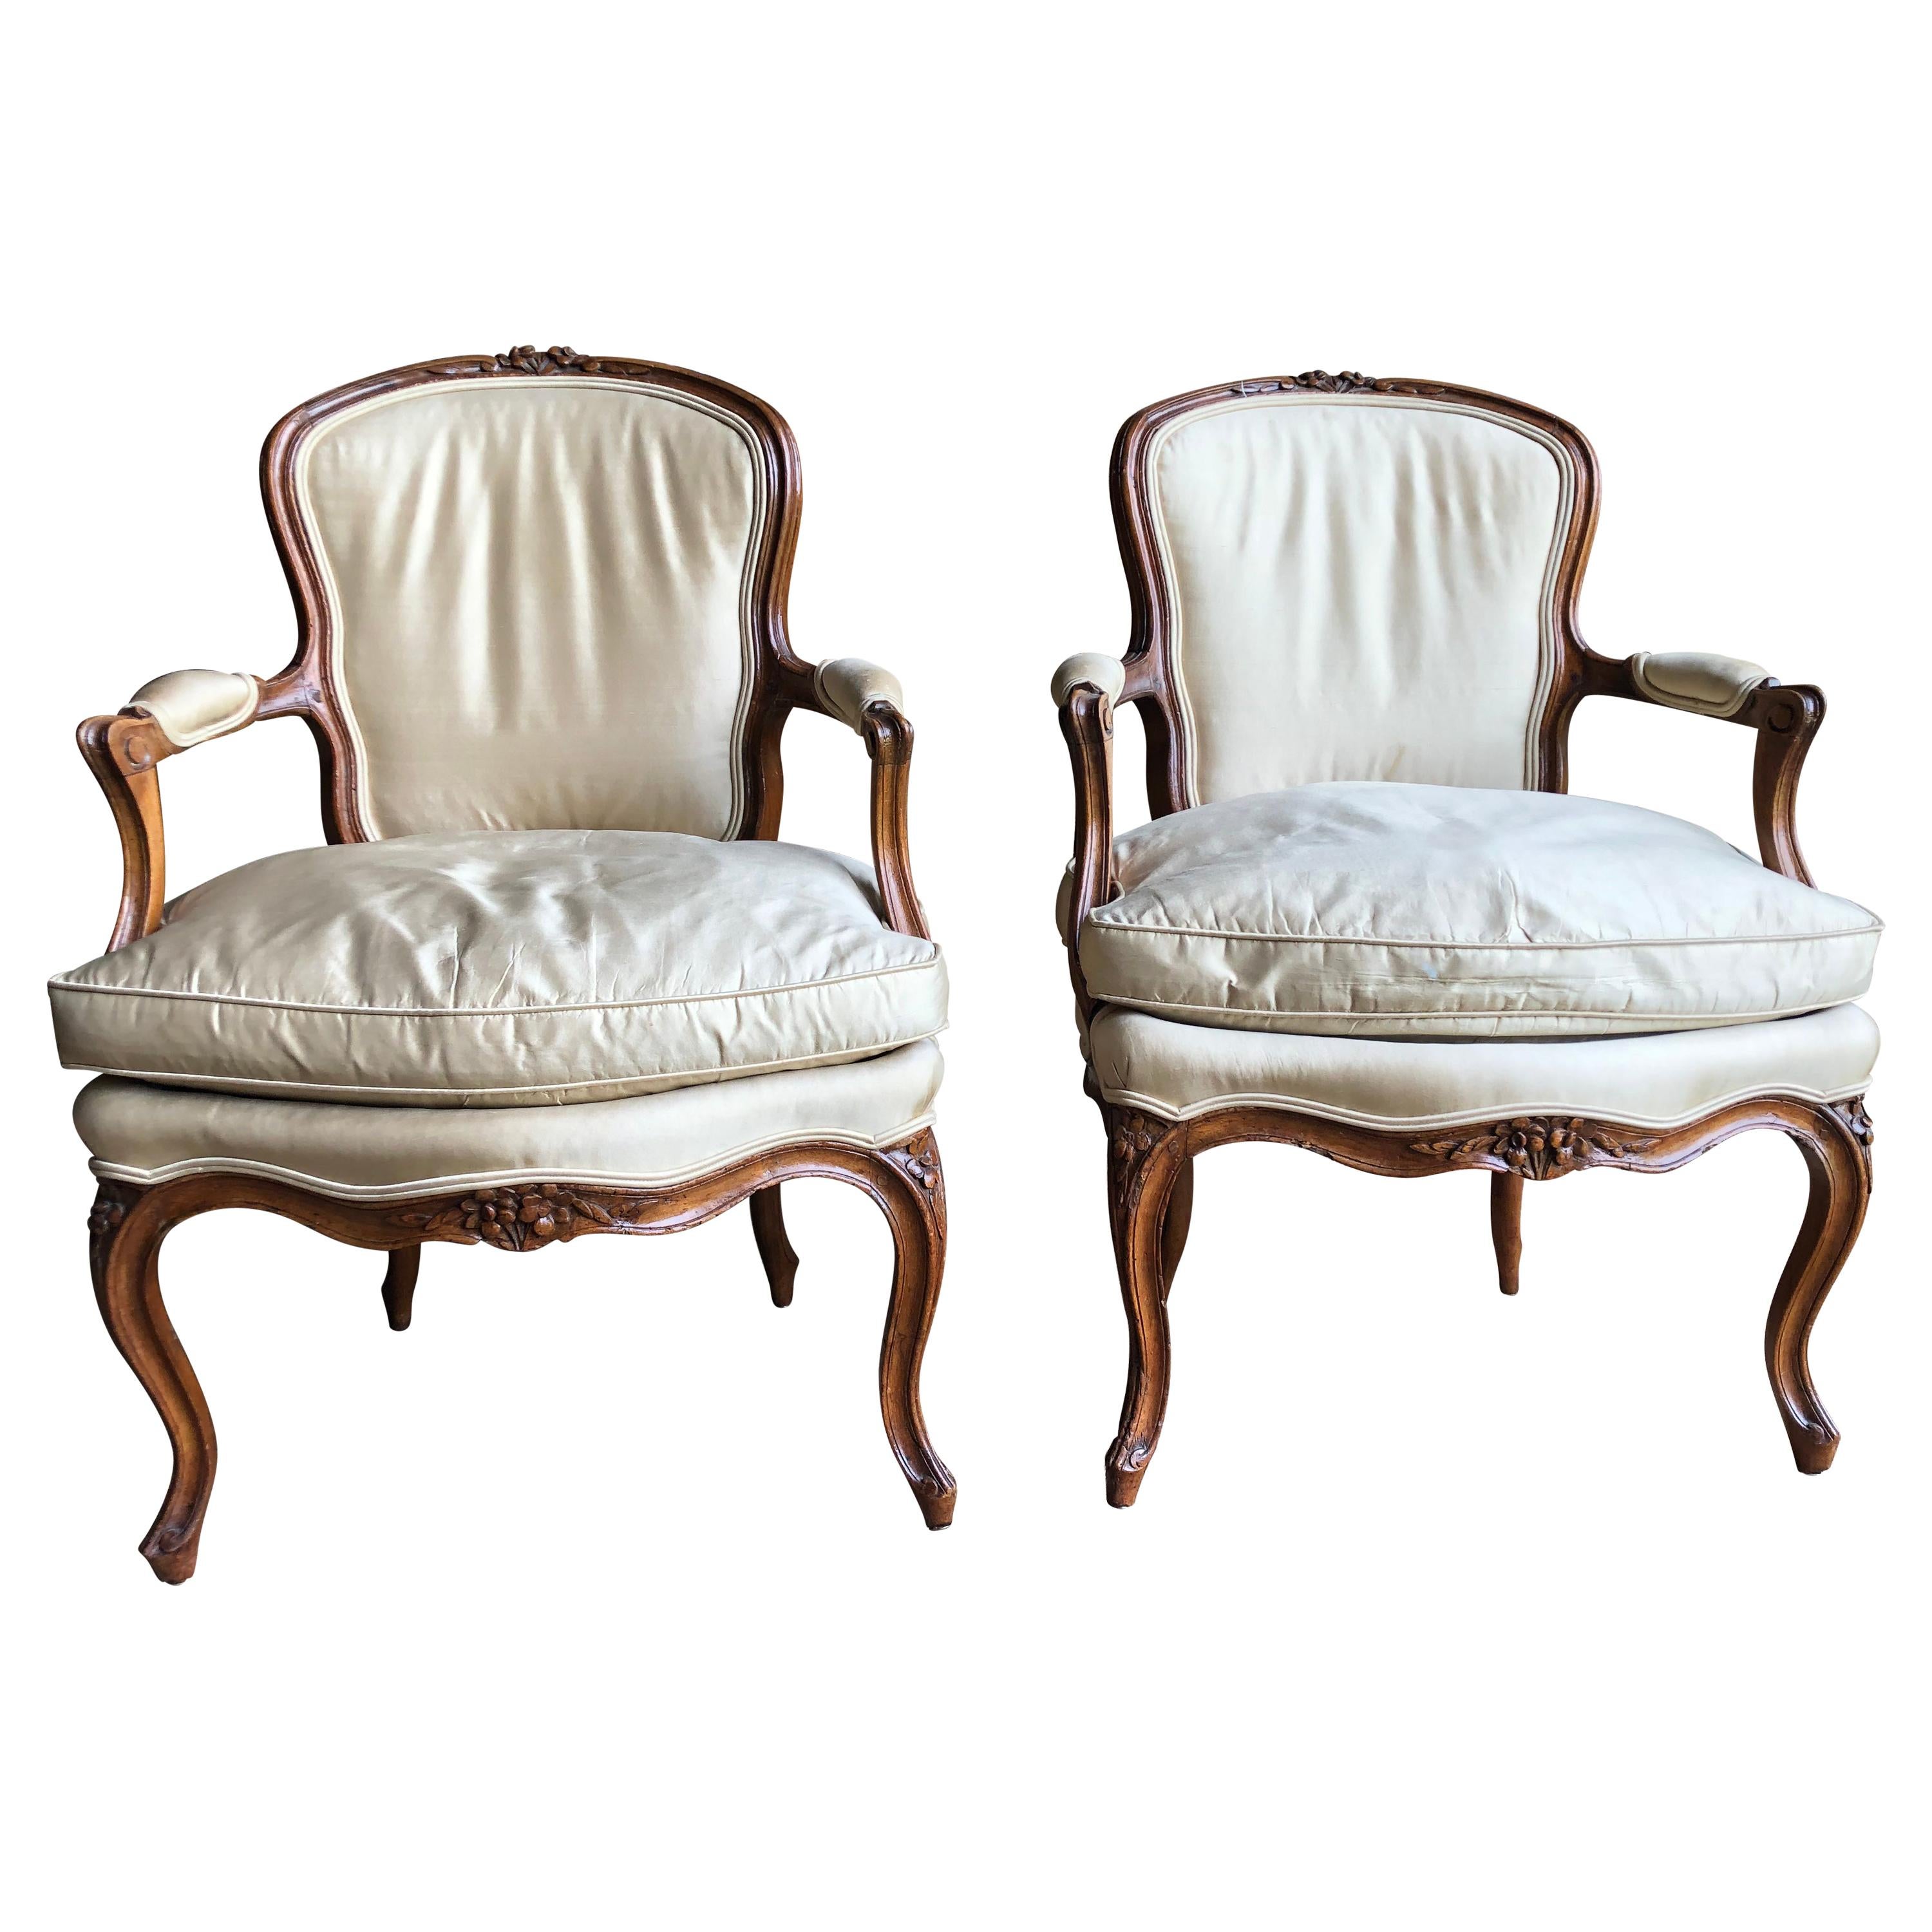 Pair of Louis XV Armchairs, 18th C